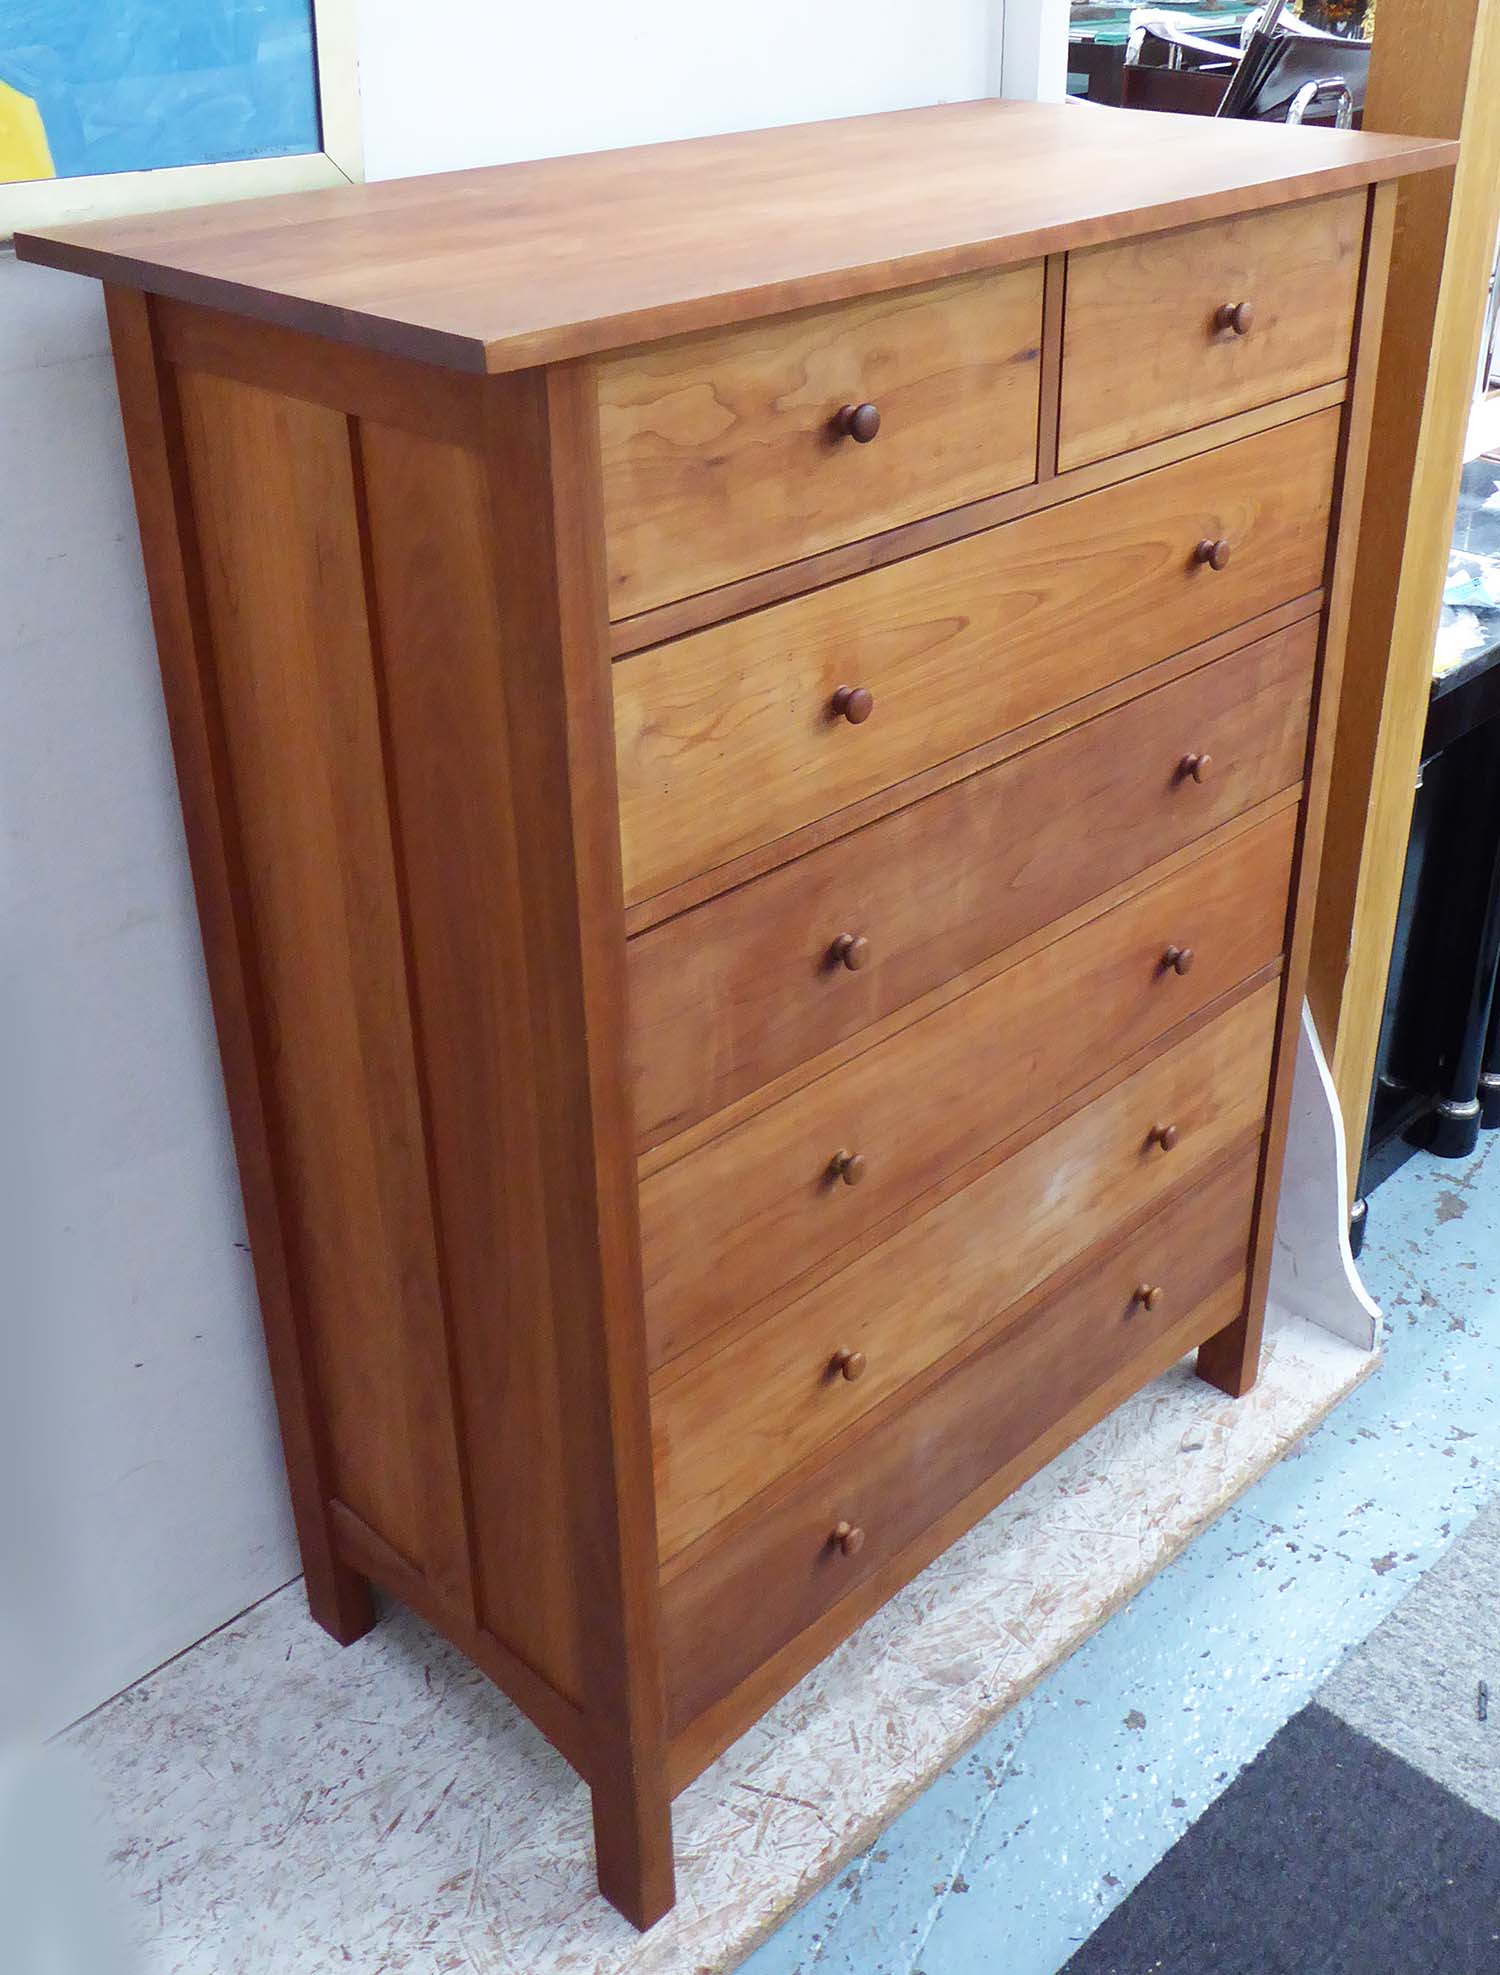 LARGE CHEST OF DRAWERS, Vermont Furniture Designs,133cm H x 51cm.